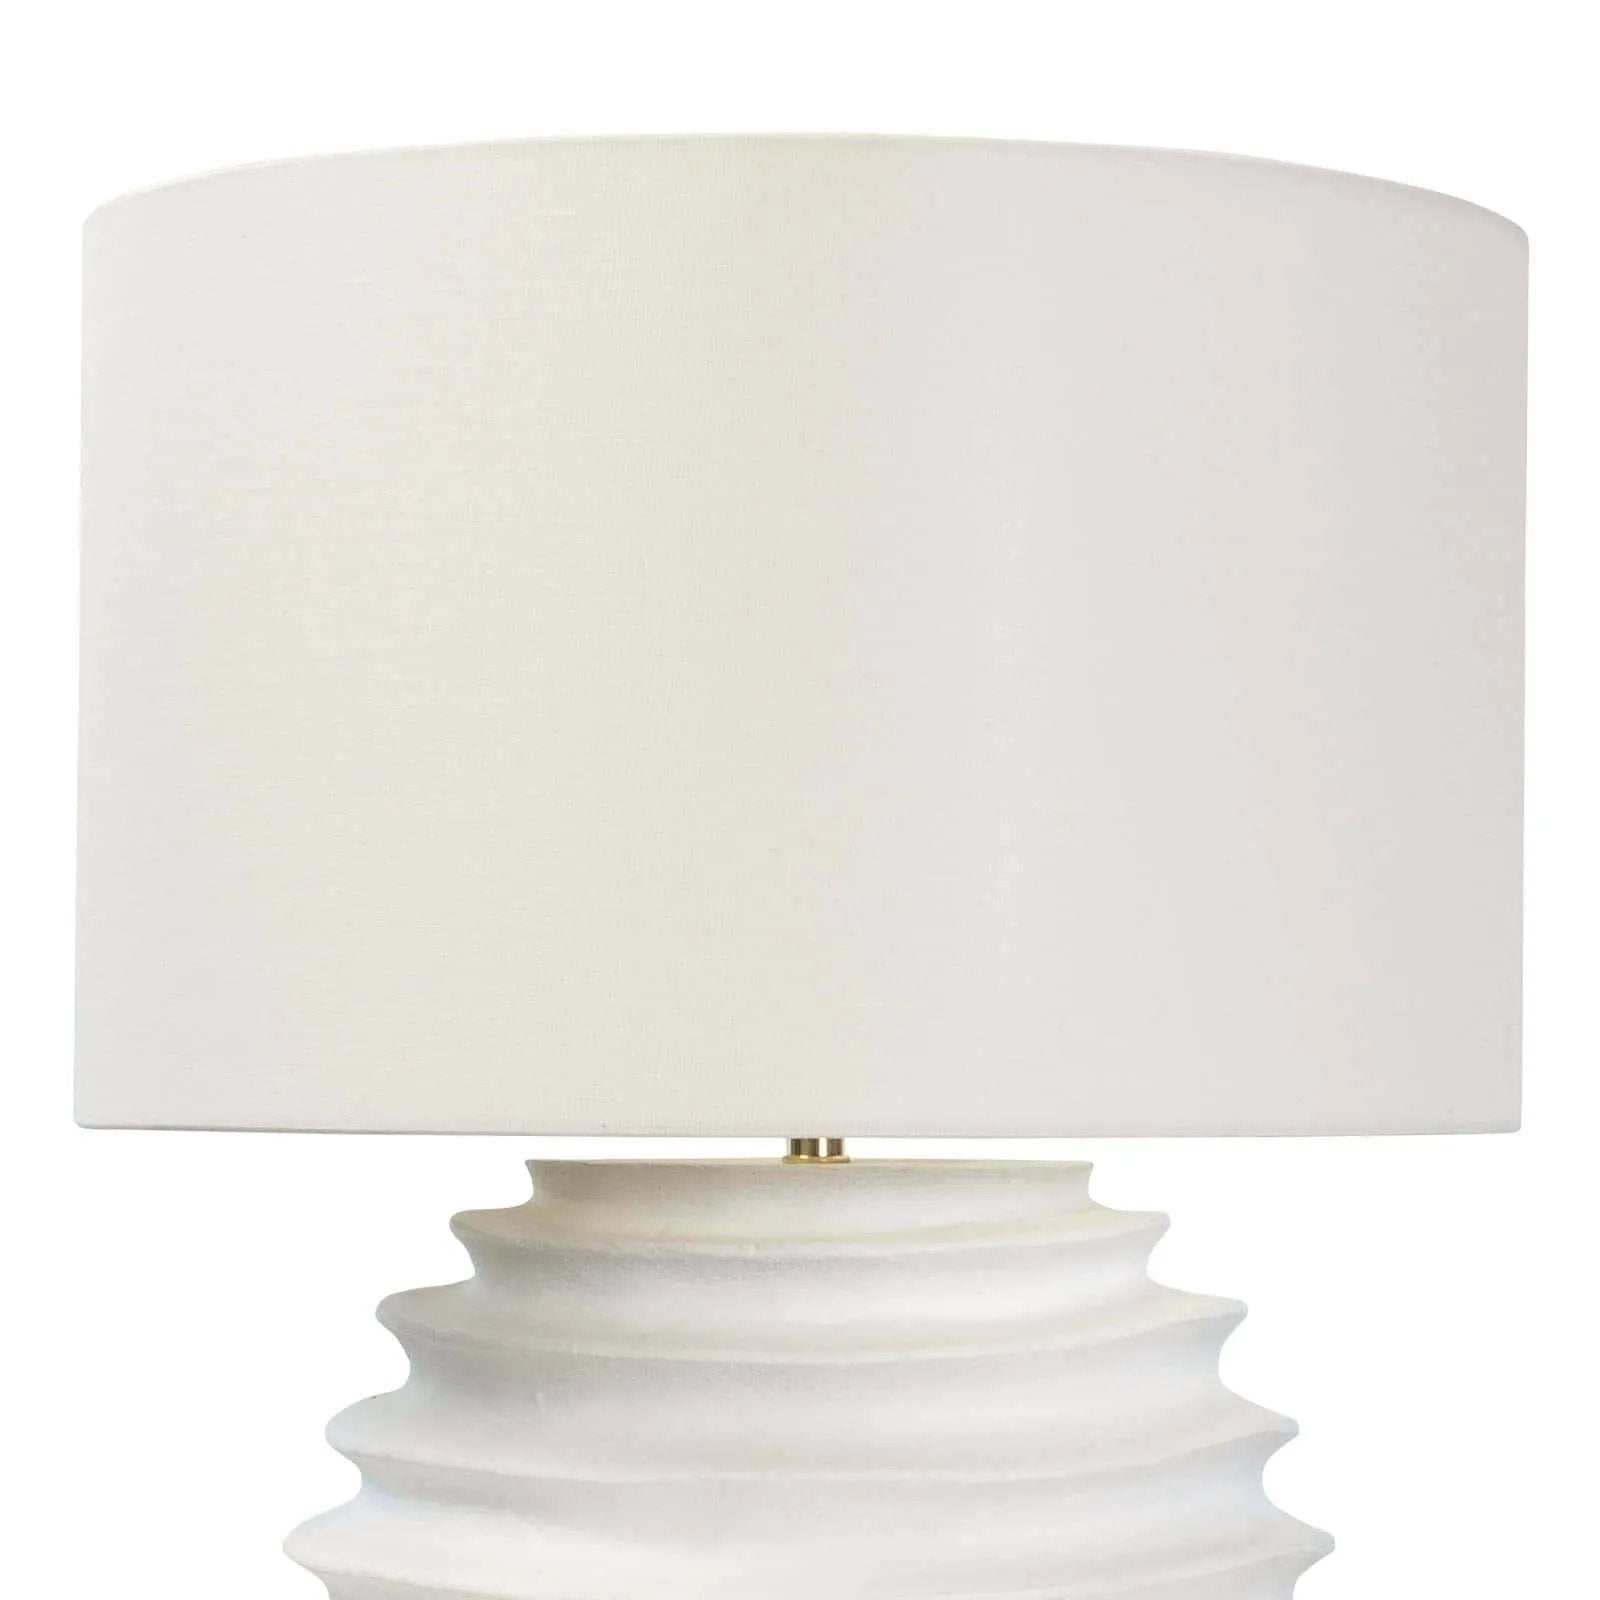 A tactile white finish on the Nabu table lamp accentuates its accordion-like base. Its simple air yet artisan feel would make for a beautiful welcome in an entryway. Amethyst Home provides interior design, new home construction design consulting, vintage area rugs, and lighting in the Park City metro area.